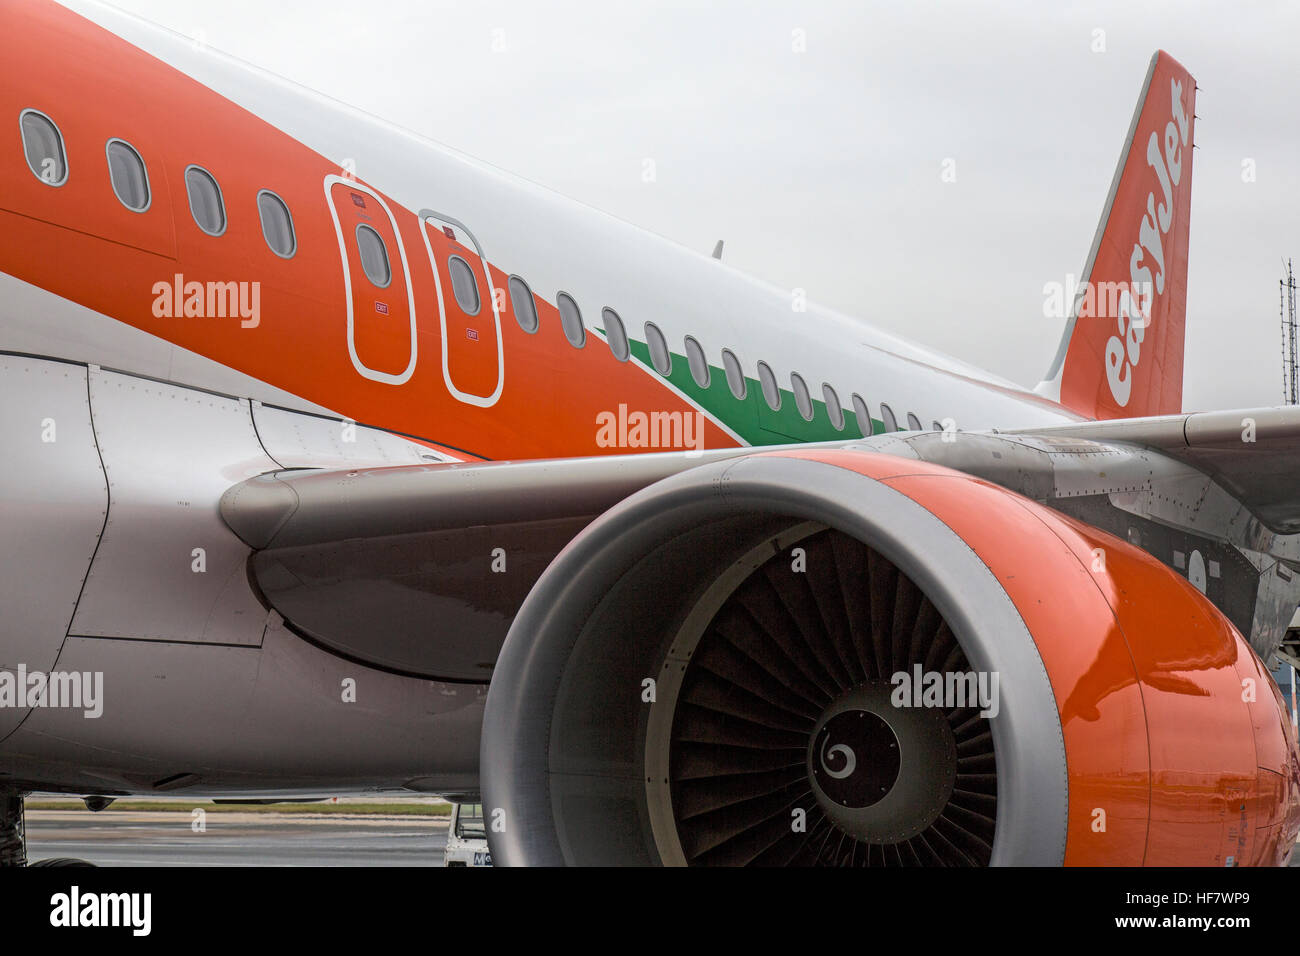 View of an Easyjet Airbus A320, showing fuselage, tail, and engine. Stock Photo